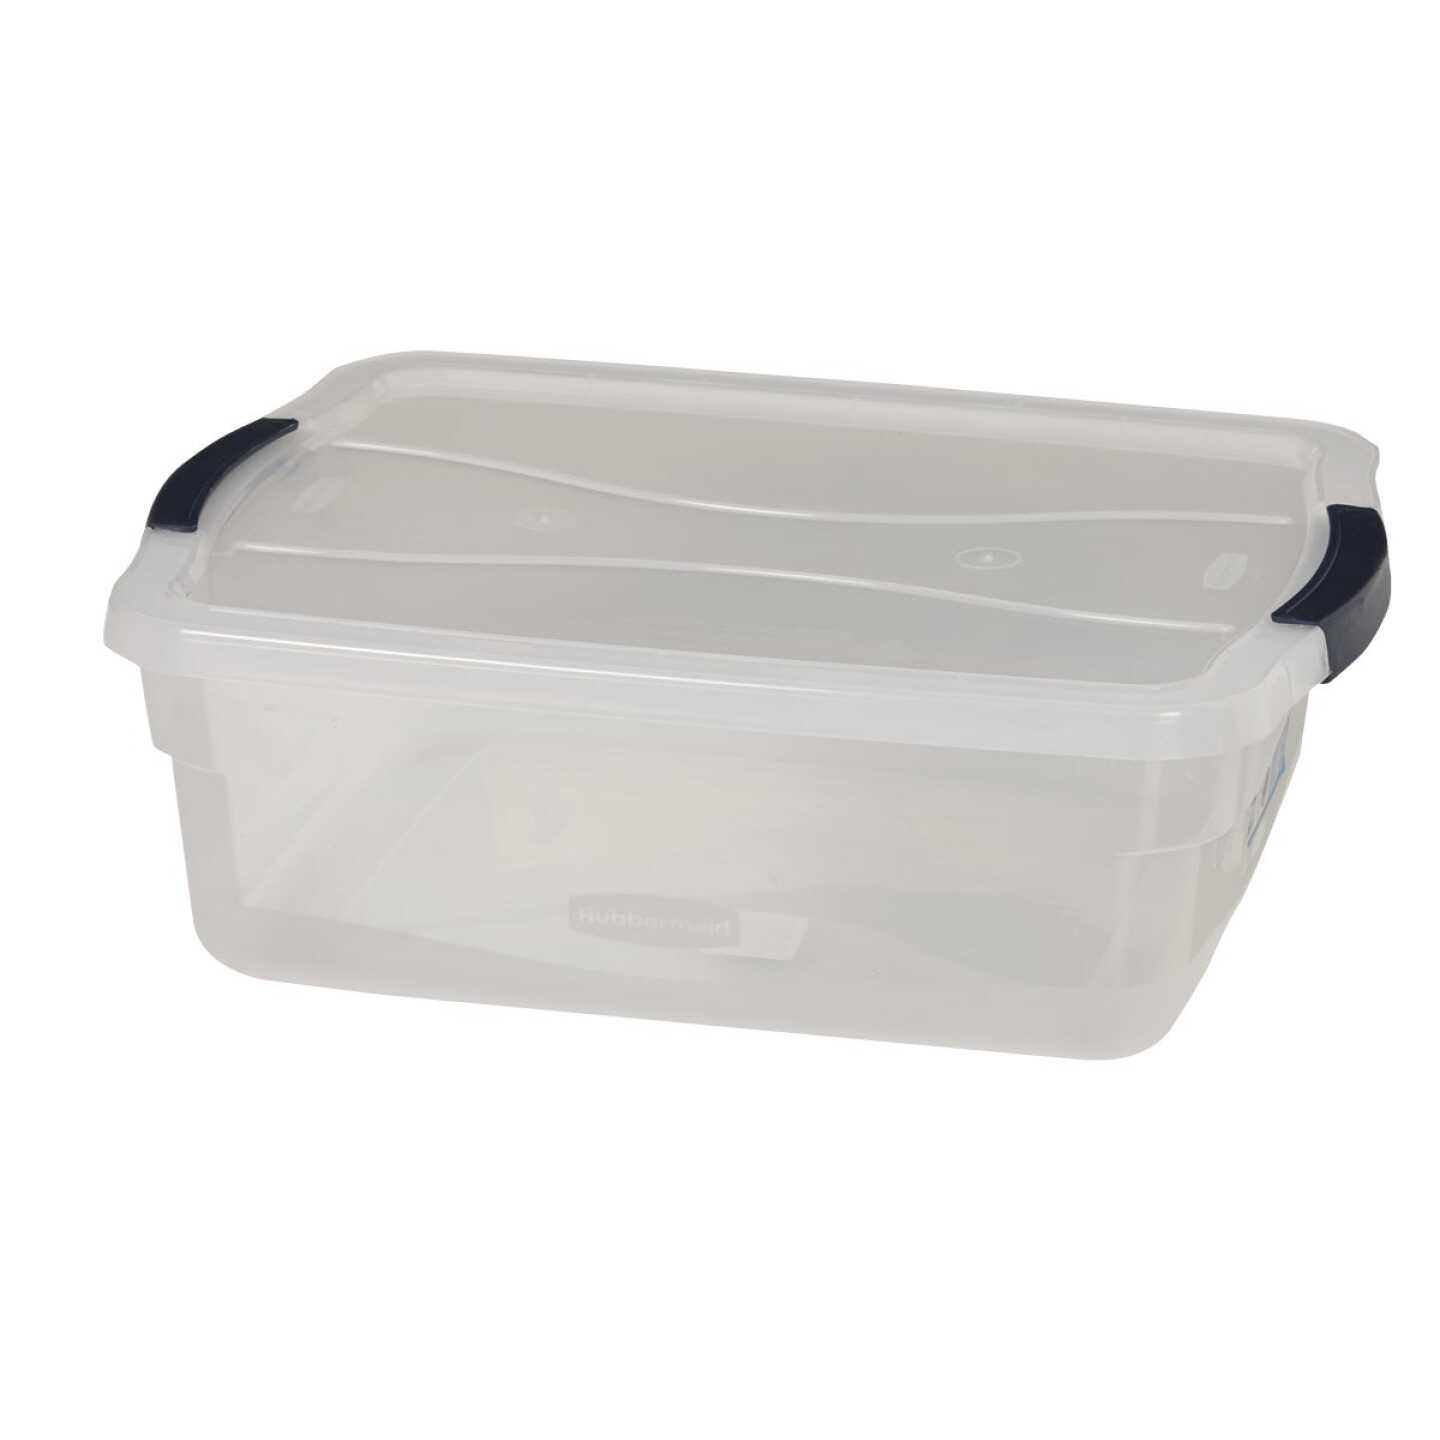 Rubbermaid Clever store 71 qt. Latching Plastic Storage Tote